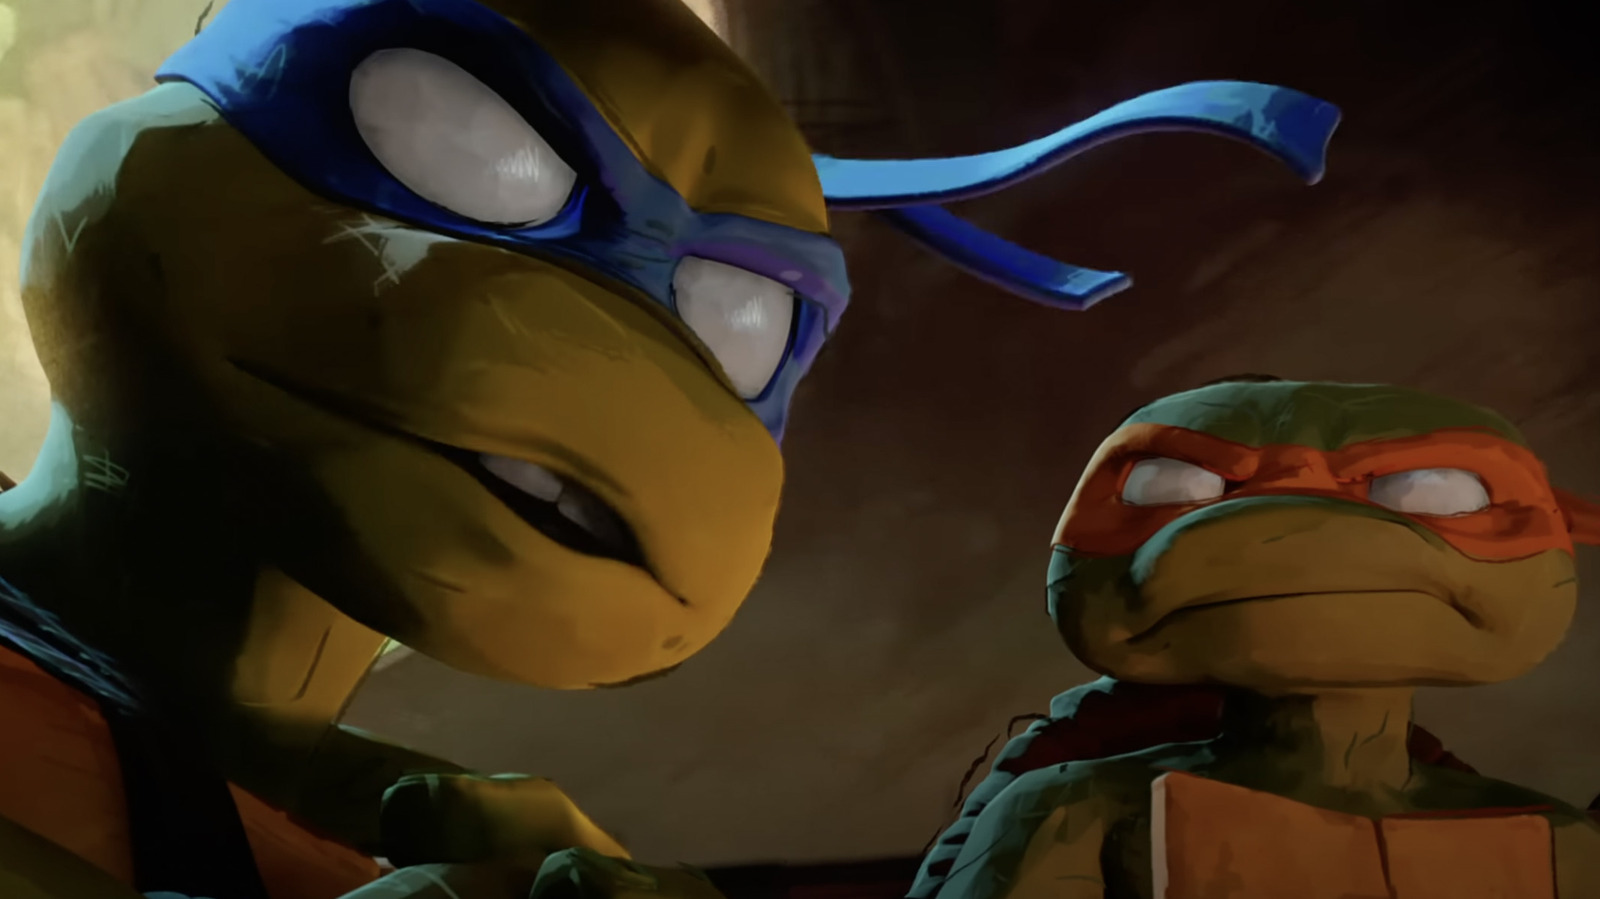 https://www.looper.com/img/gallery/why-tmnt-mutant-mayhems-sequel-and-series-news-is-a-huge-shift-for-paramount/l-intro-1690406811.jpg